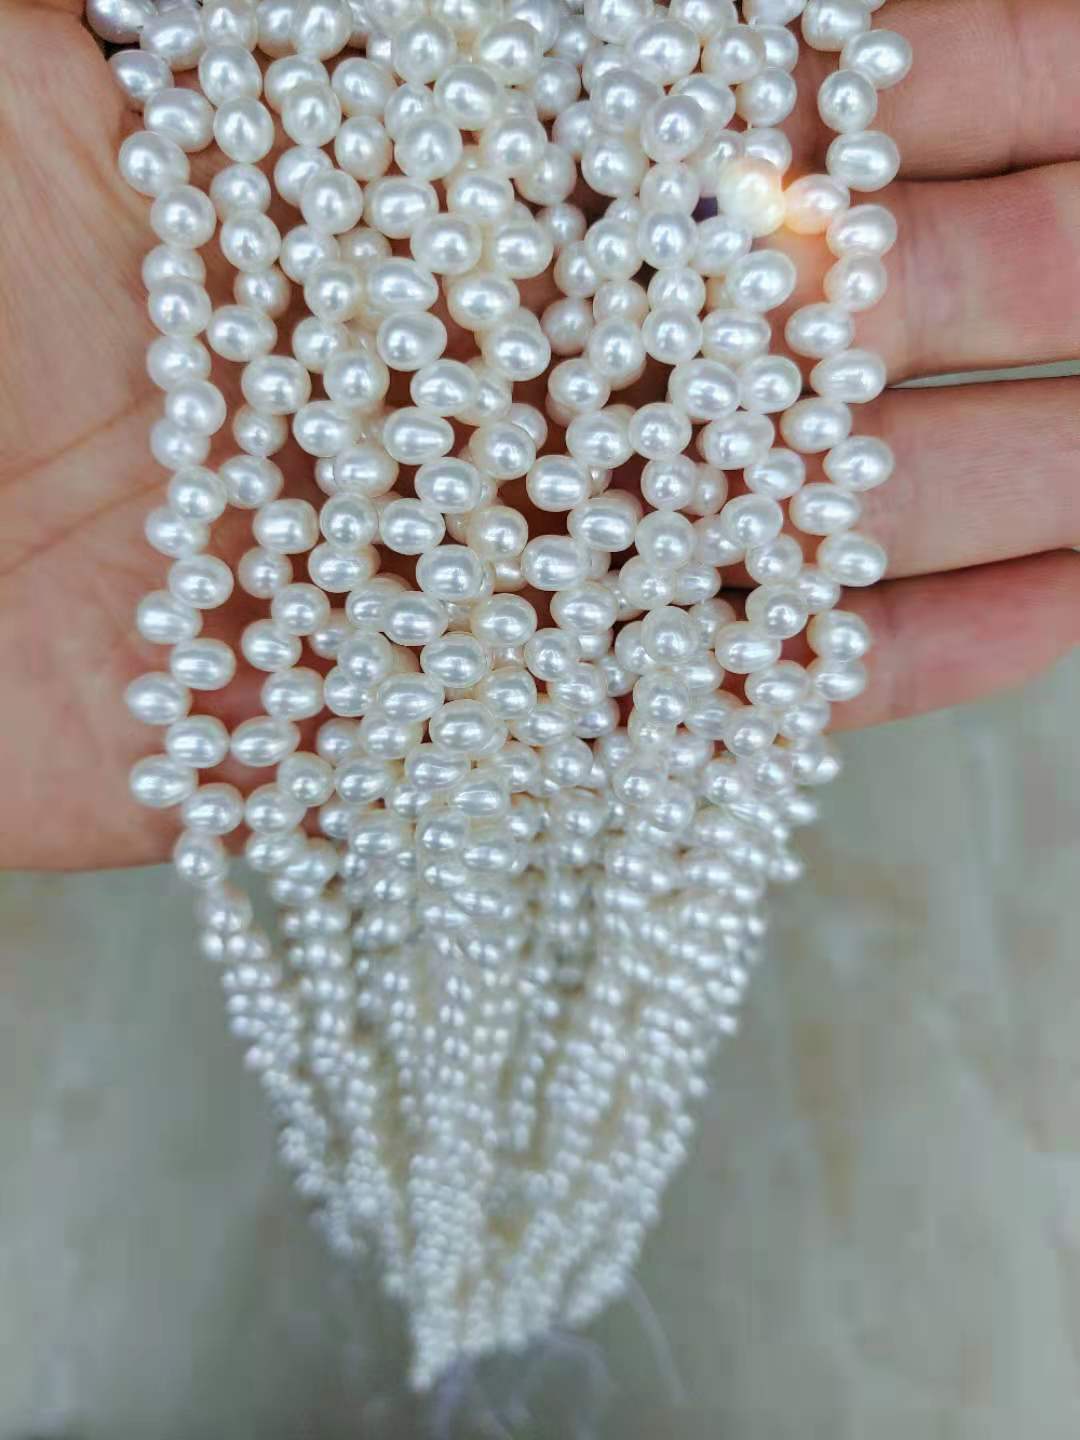 5-6 mm AAA rice pearl side hole Raw Pearls nature pearl loose Pearl suppliers and wholesale freshwater pearl with farm direct prices